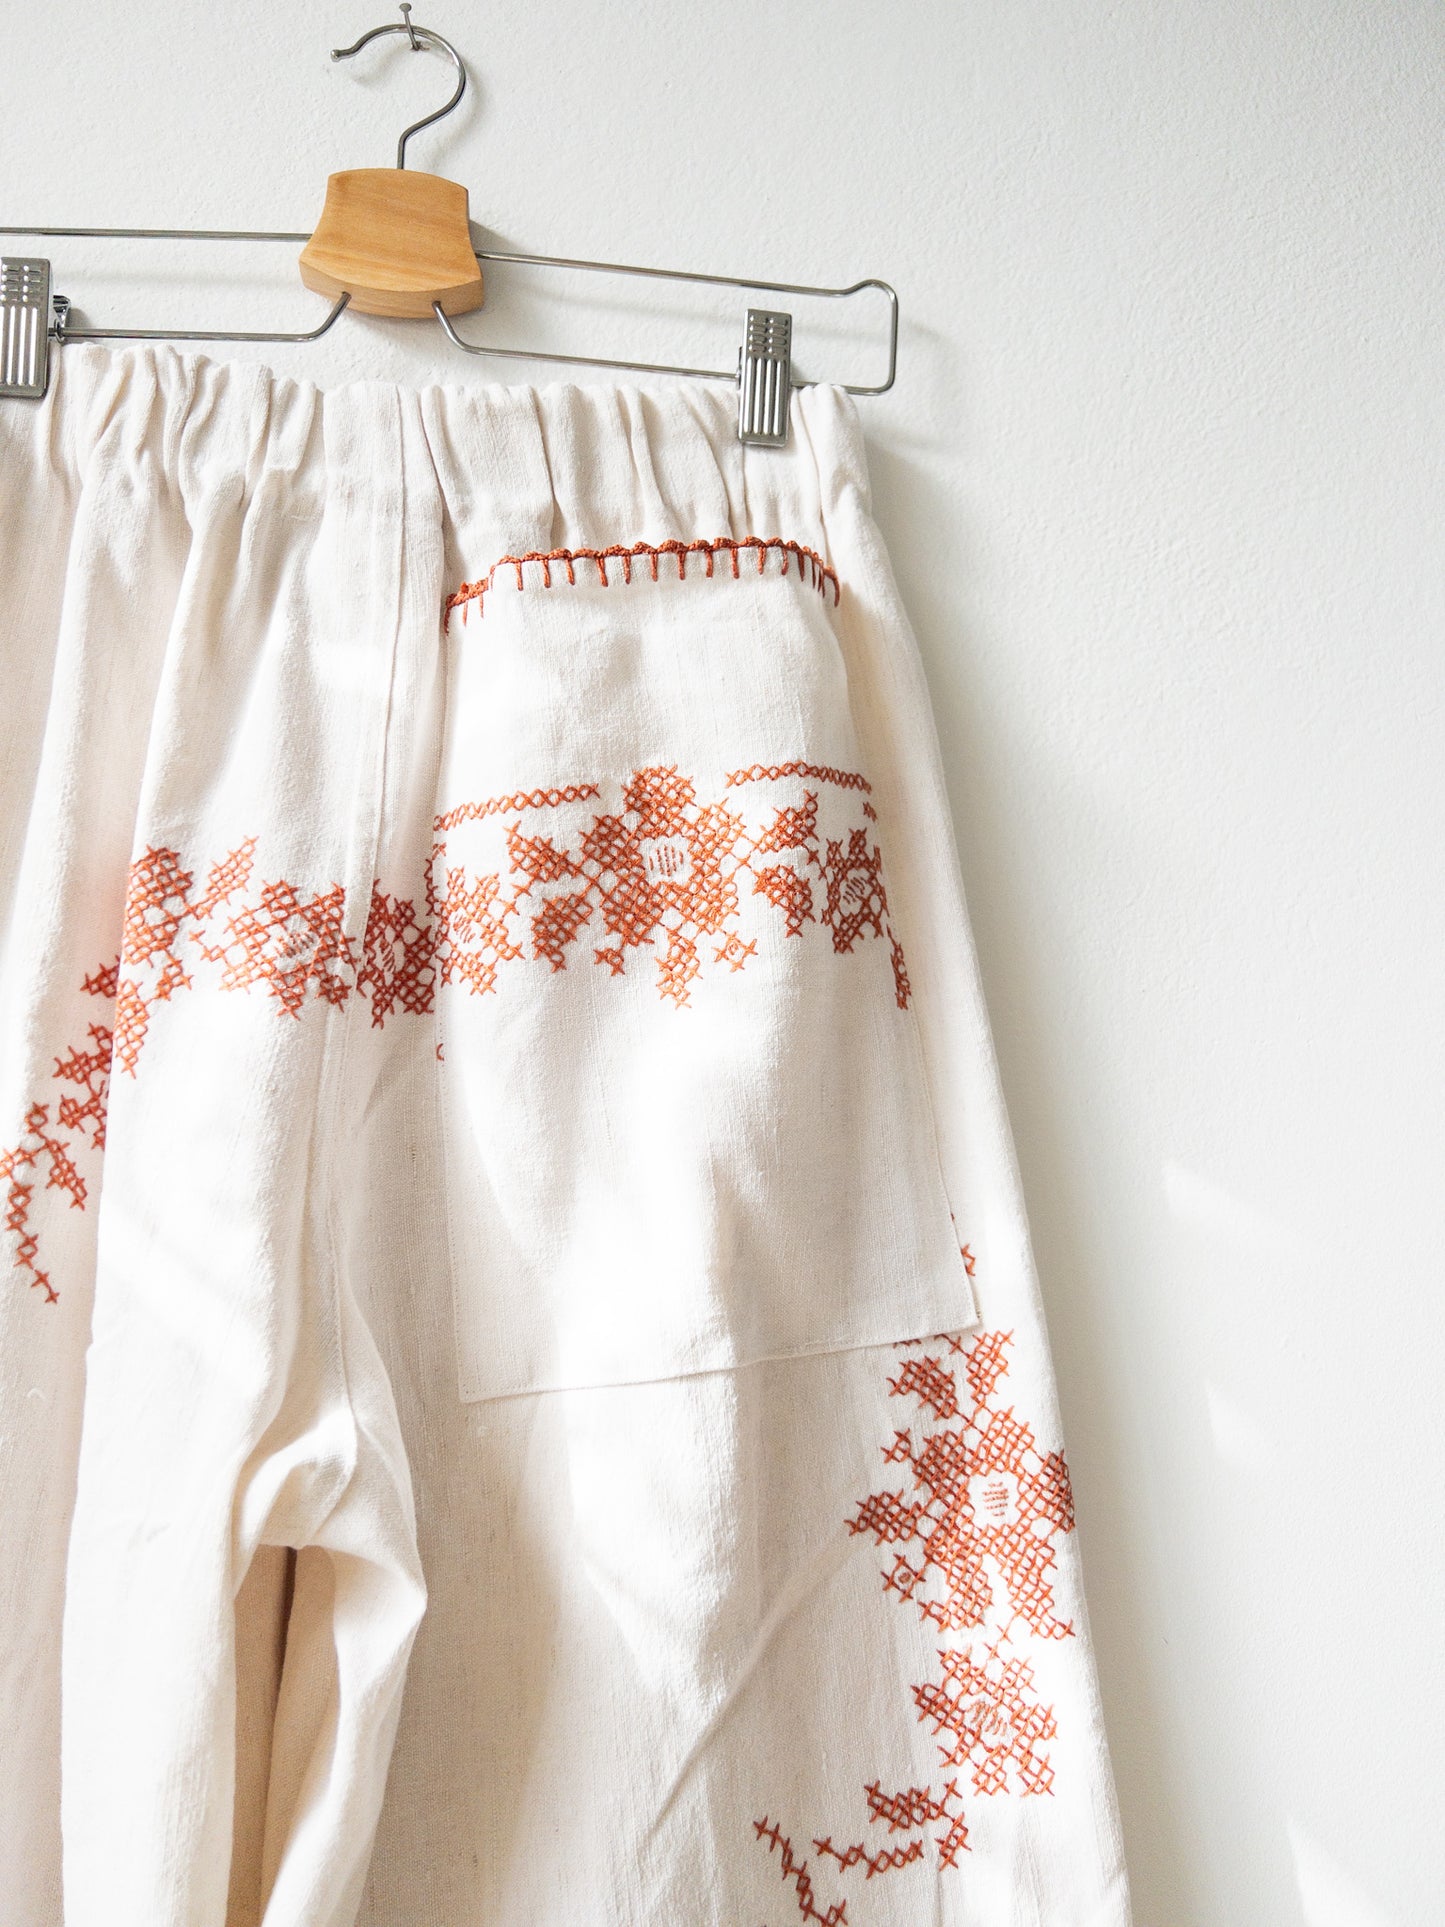 Linen pants with embroidery